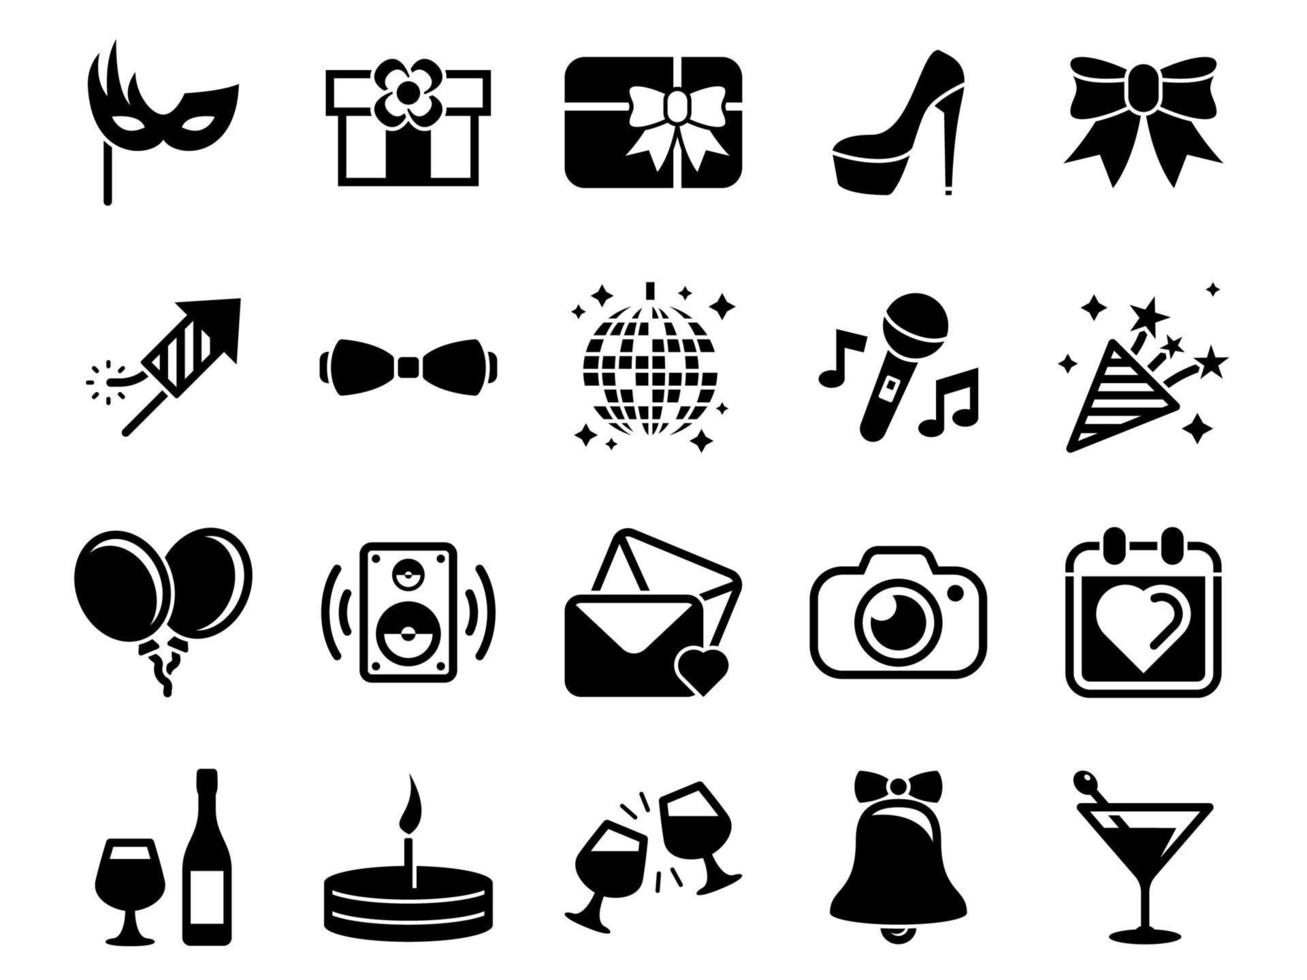 Set of simple icons on a theme Party, Birthday, Holidays, vector, design, collection, flat, sign, symbol,element, object, illustration. Black icons isolated against white background vector